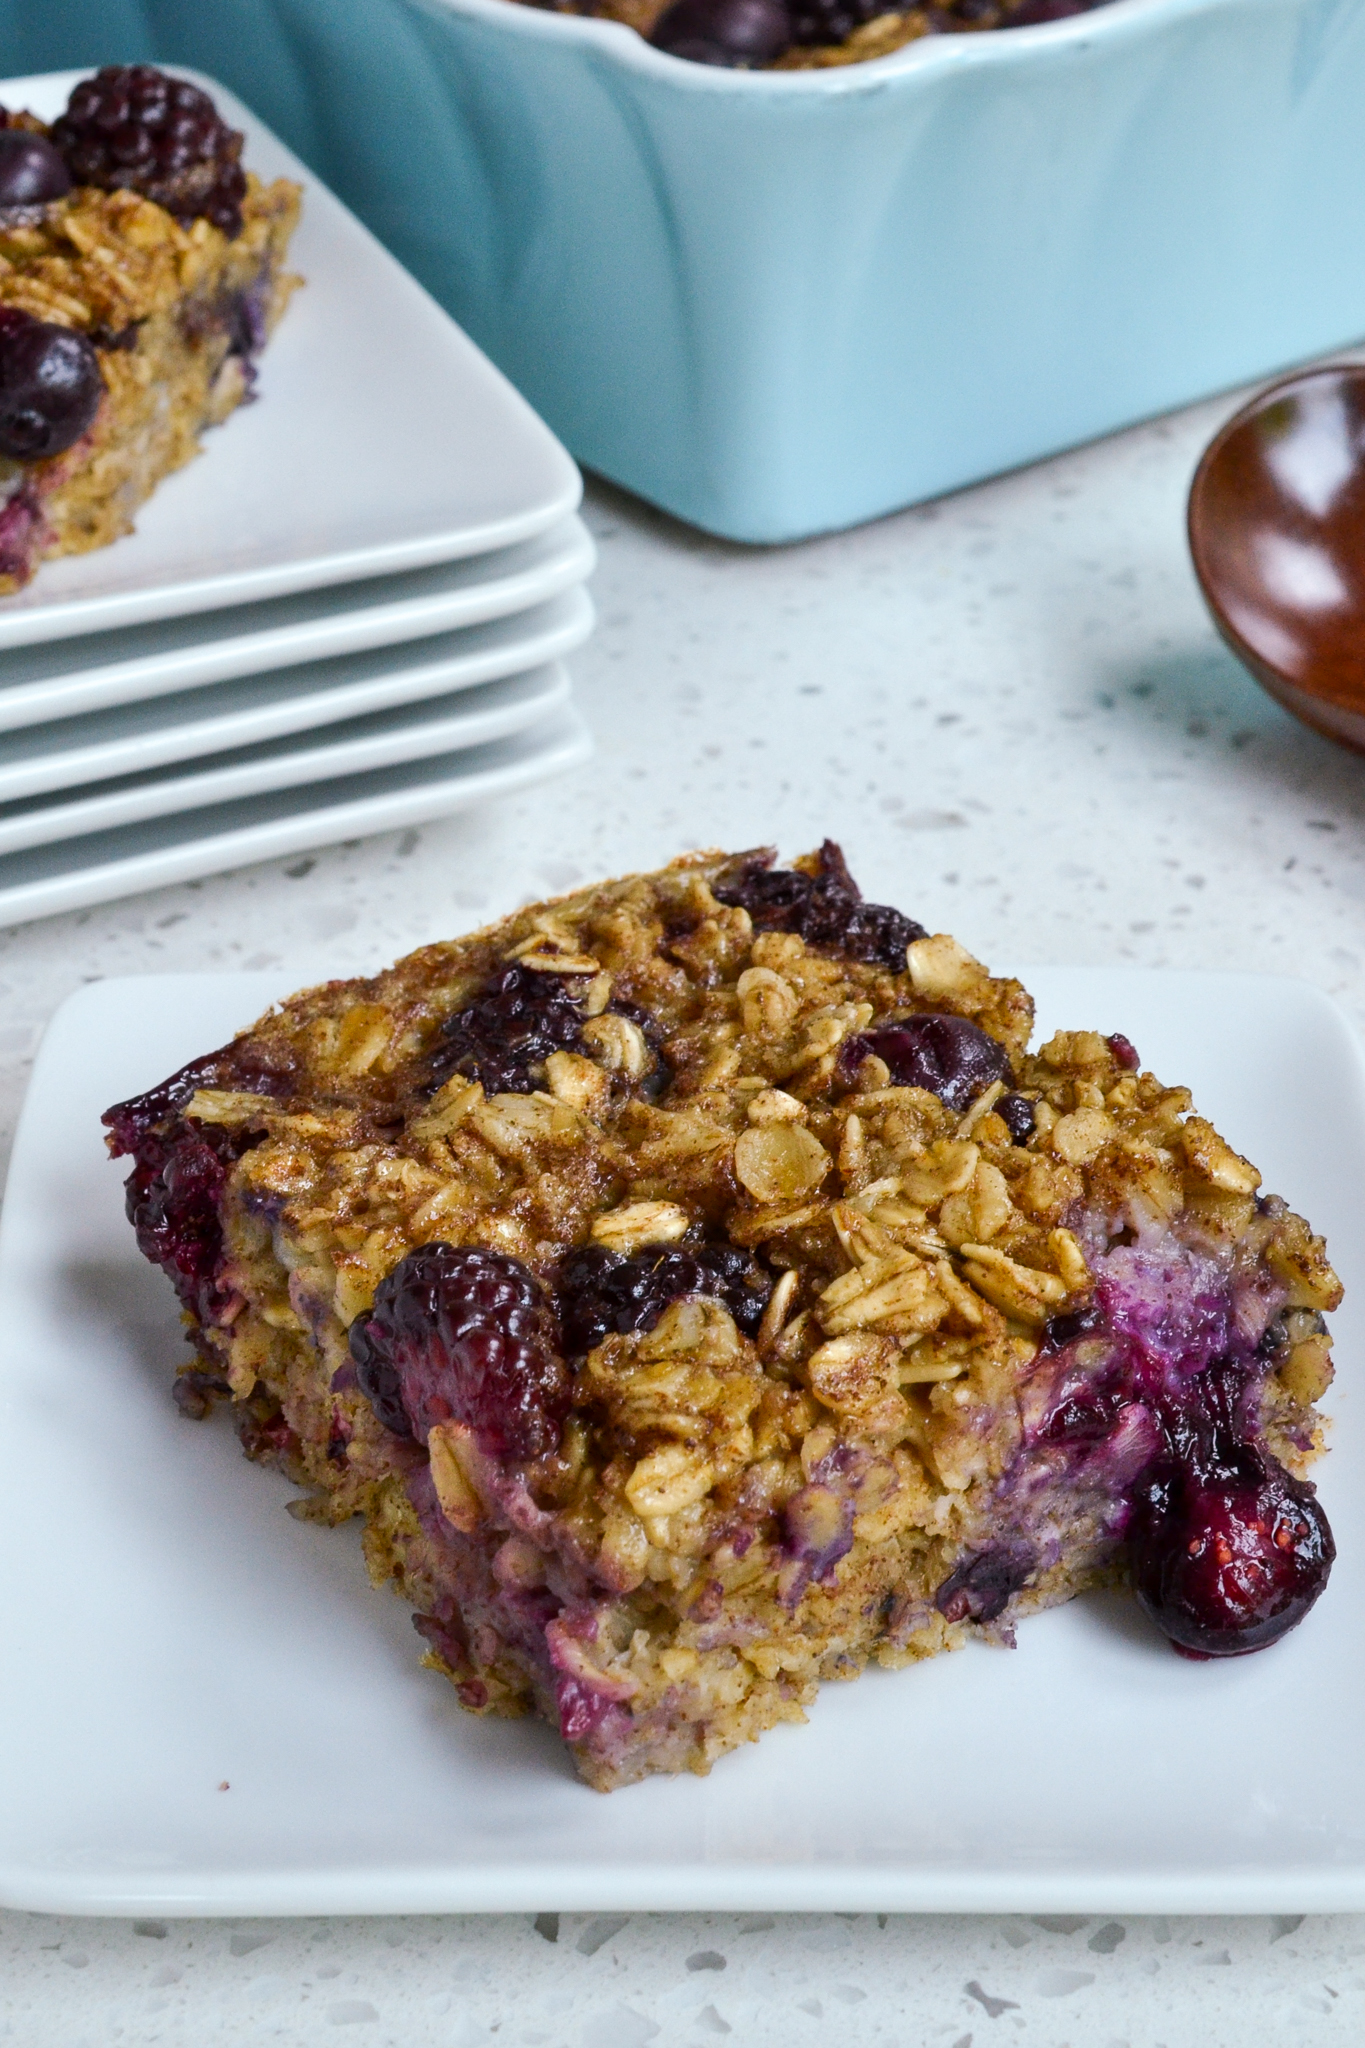 Baked oatmeal with blueberries and blackberries